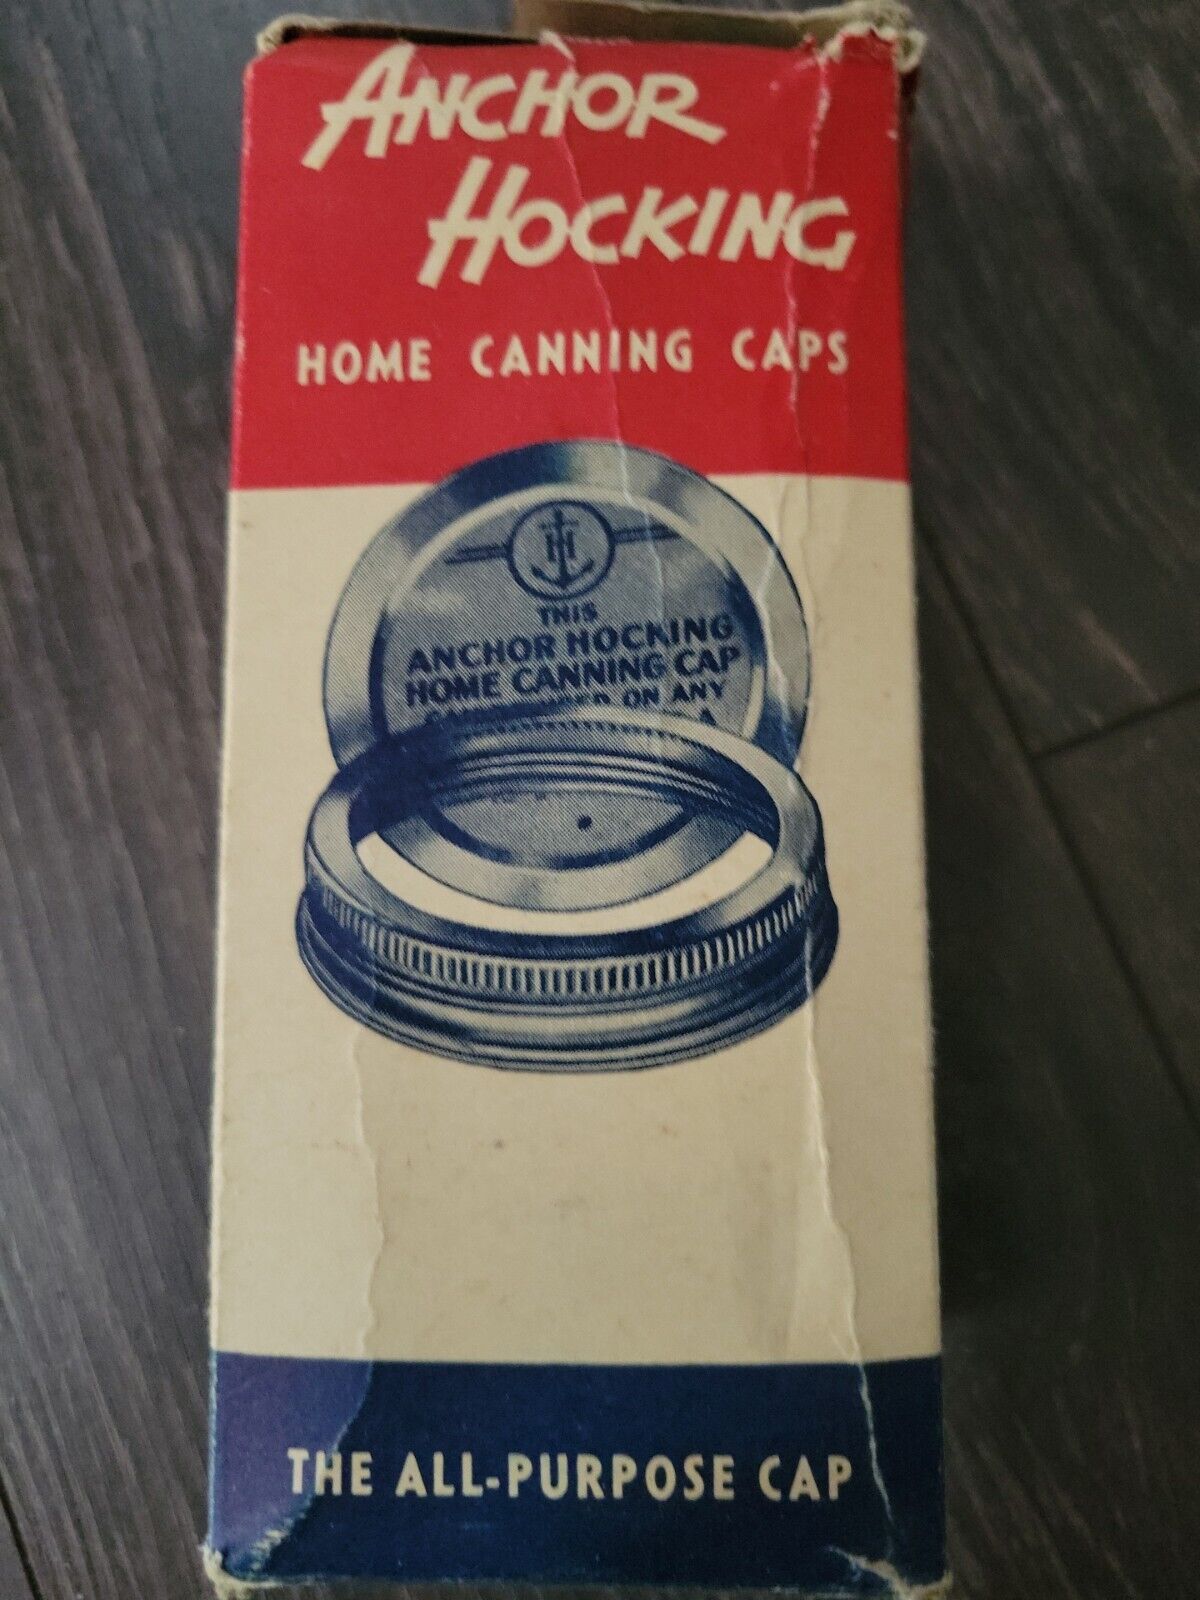  Anchor Hocking Standard Mouth Canning Caps Box USA Vintage 6.5x3 in Empty